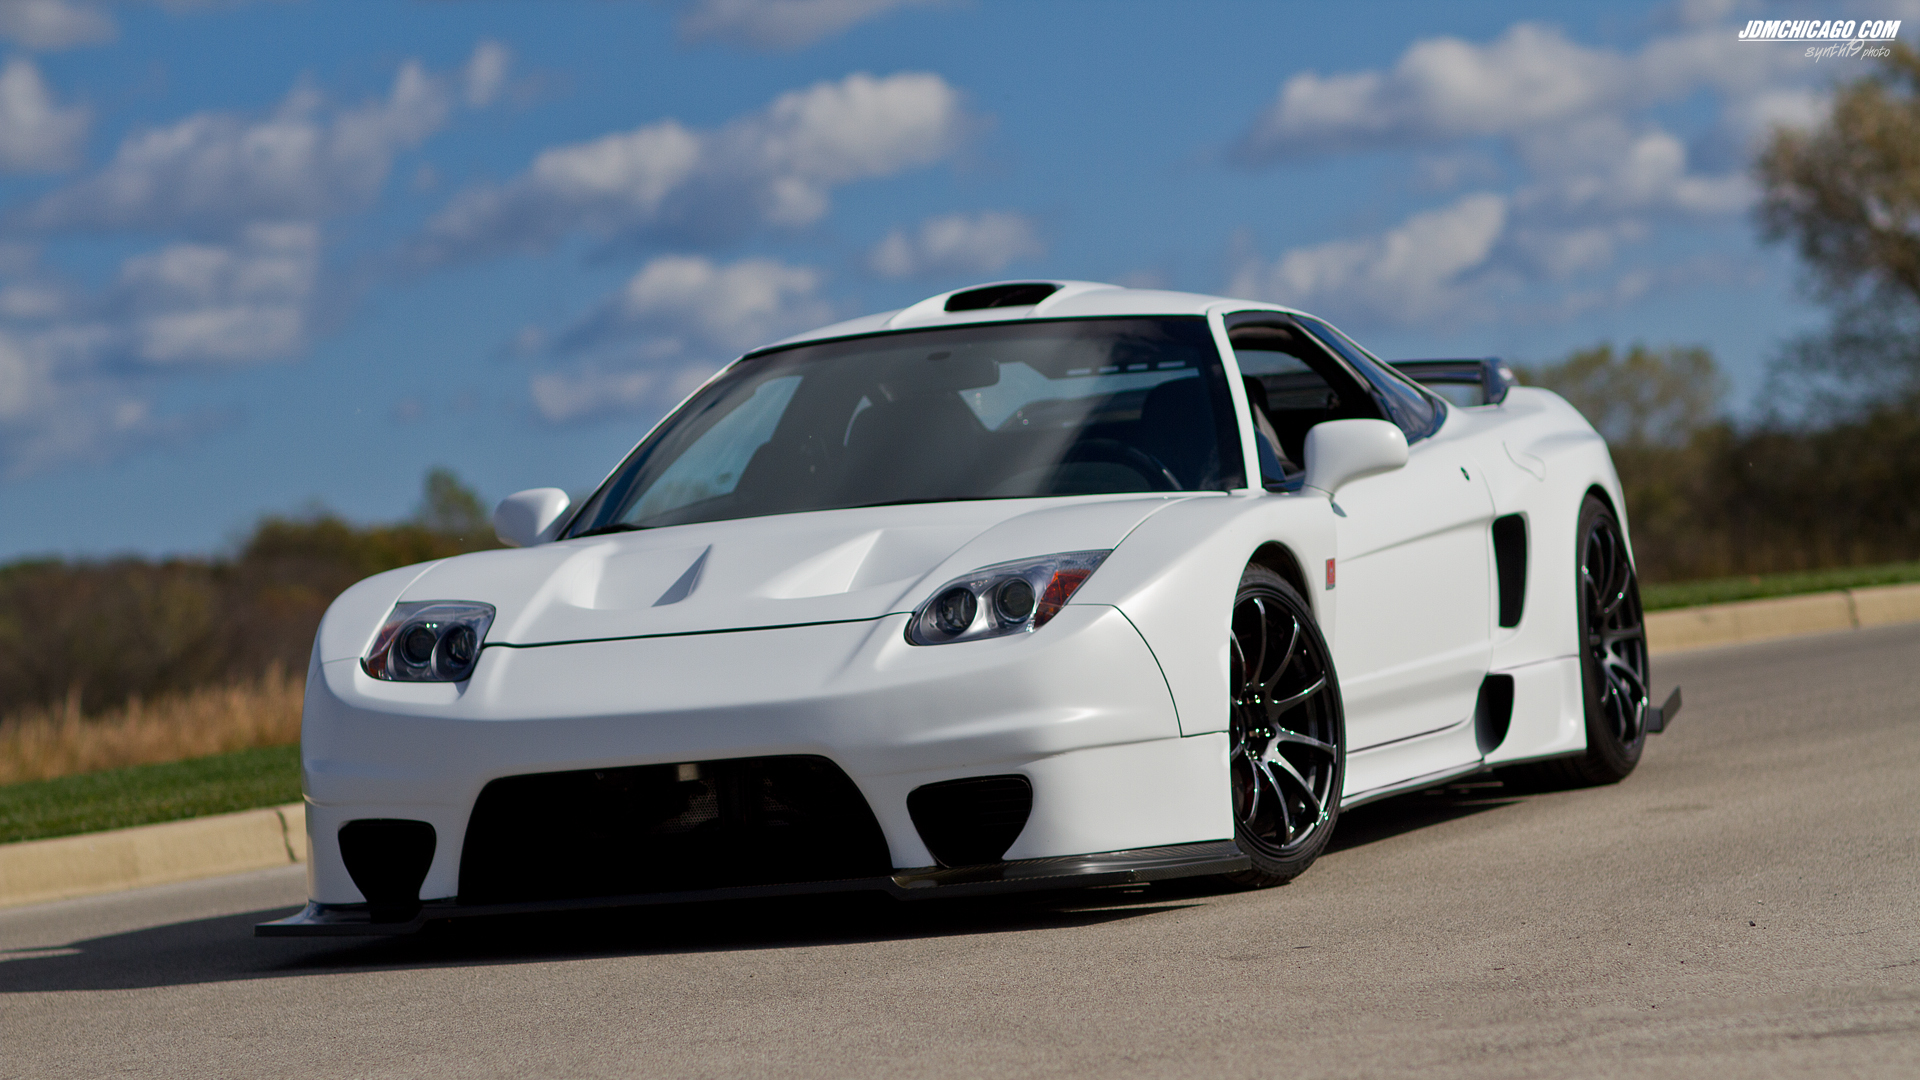 Project Widebody- Jeff’s 1991 Acura NSX.